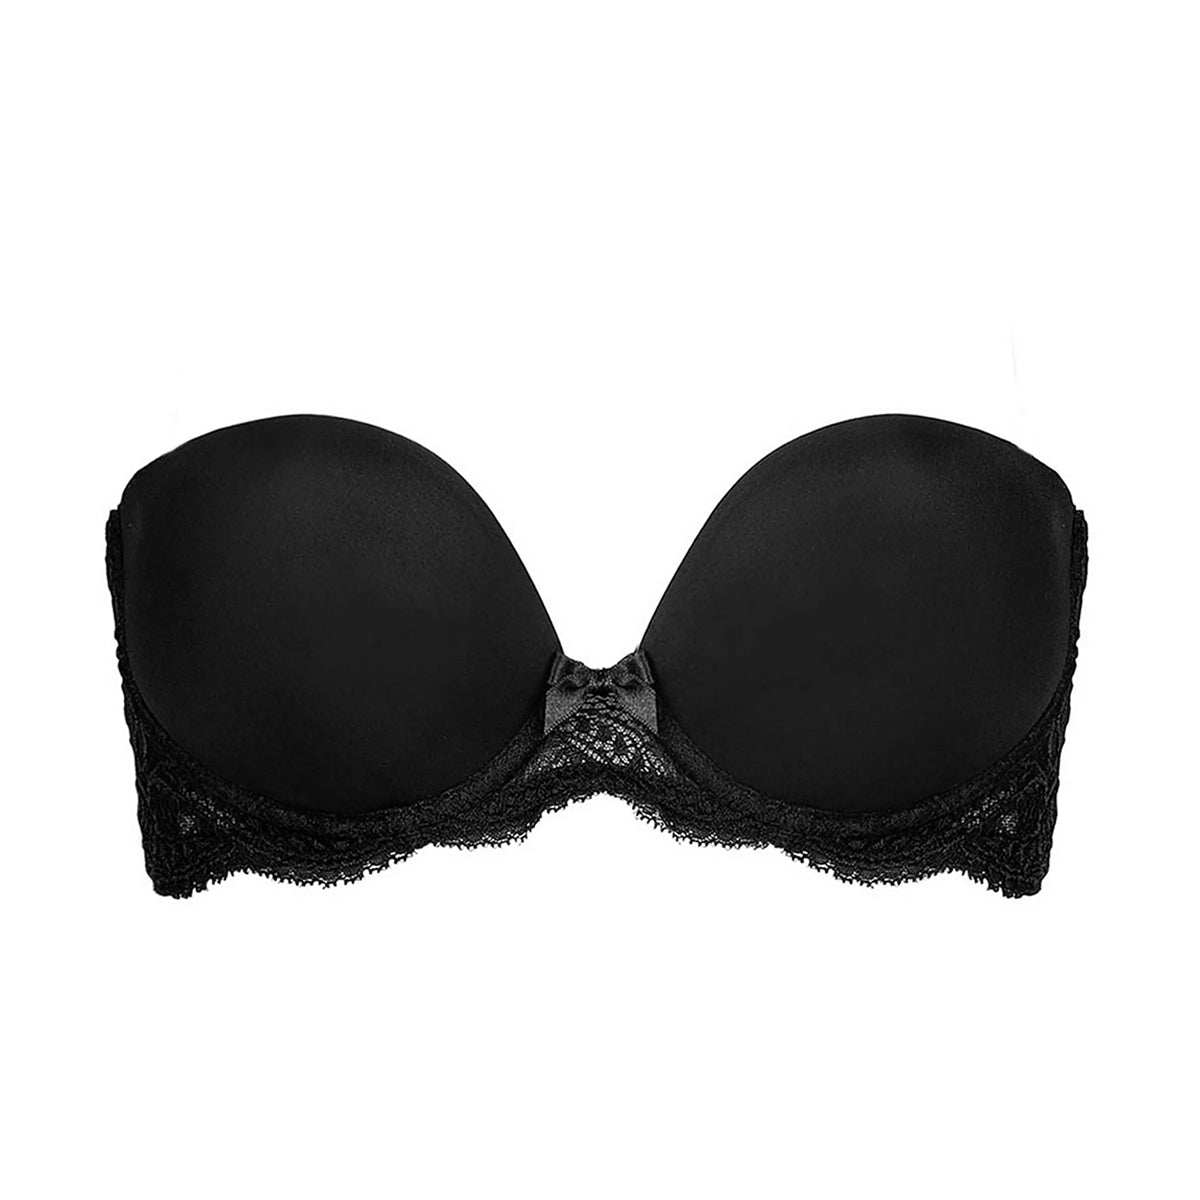 We reveal the best bras for your strapless, slip or plunge party